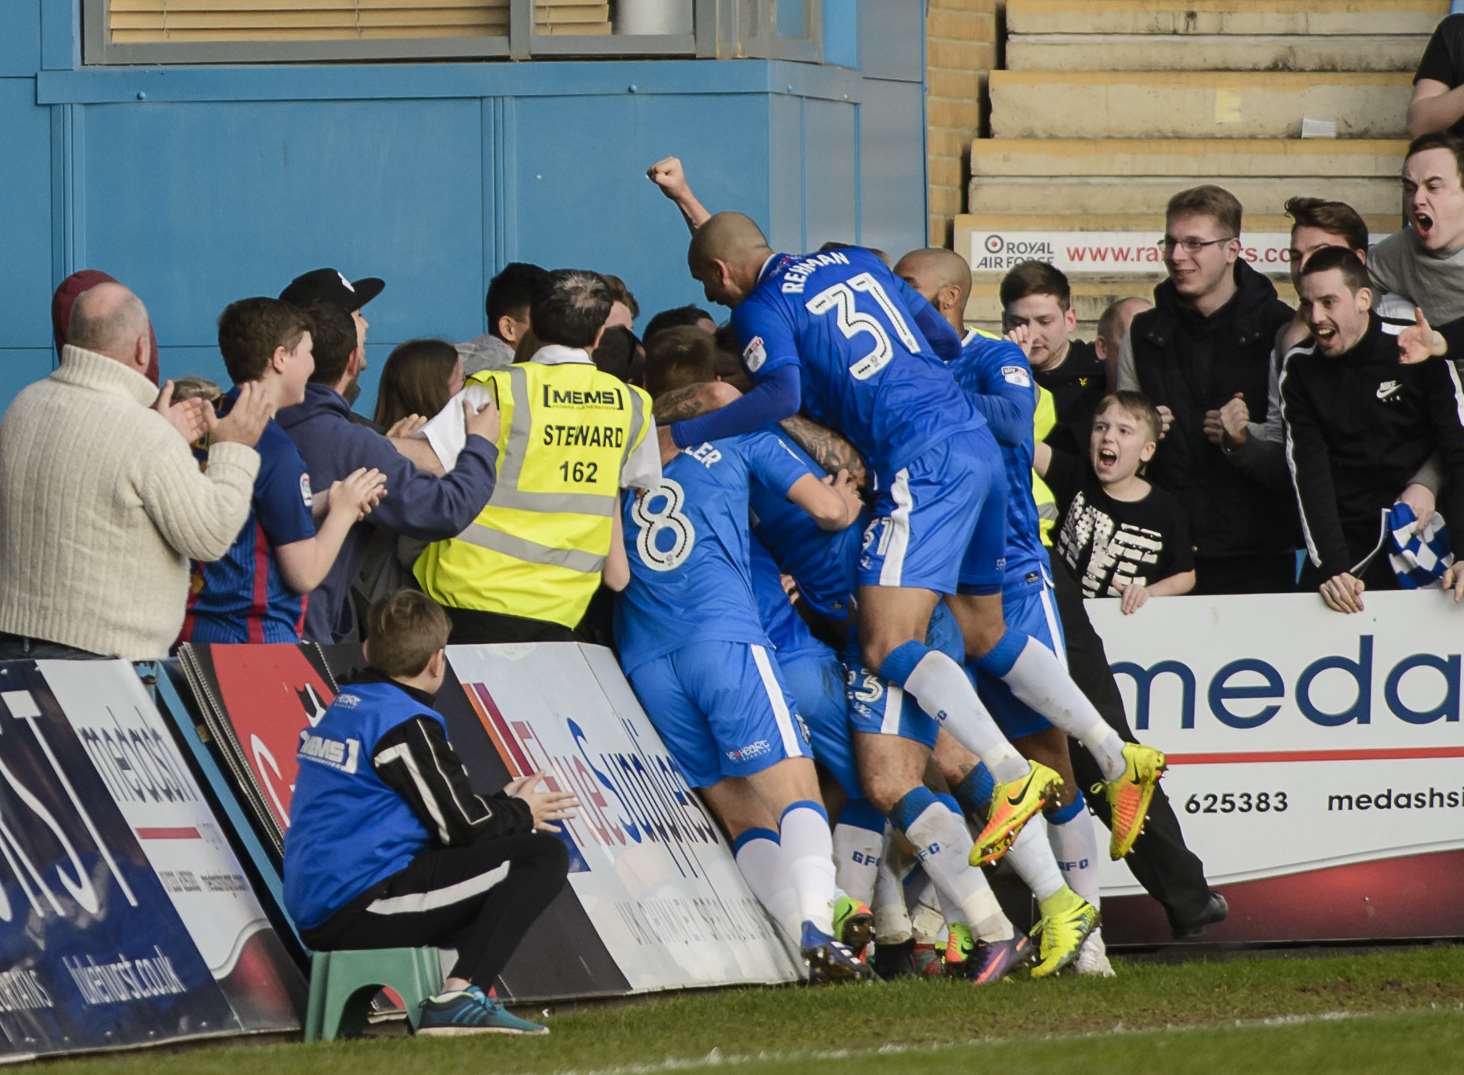 The celebrations that landed Josh Wright a 10th booking of the season - and a two-match ban. Picture: Andy Payton